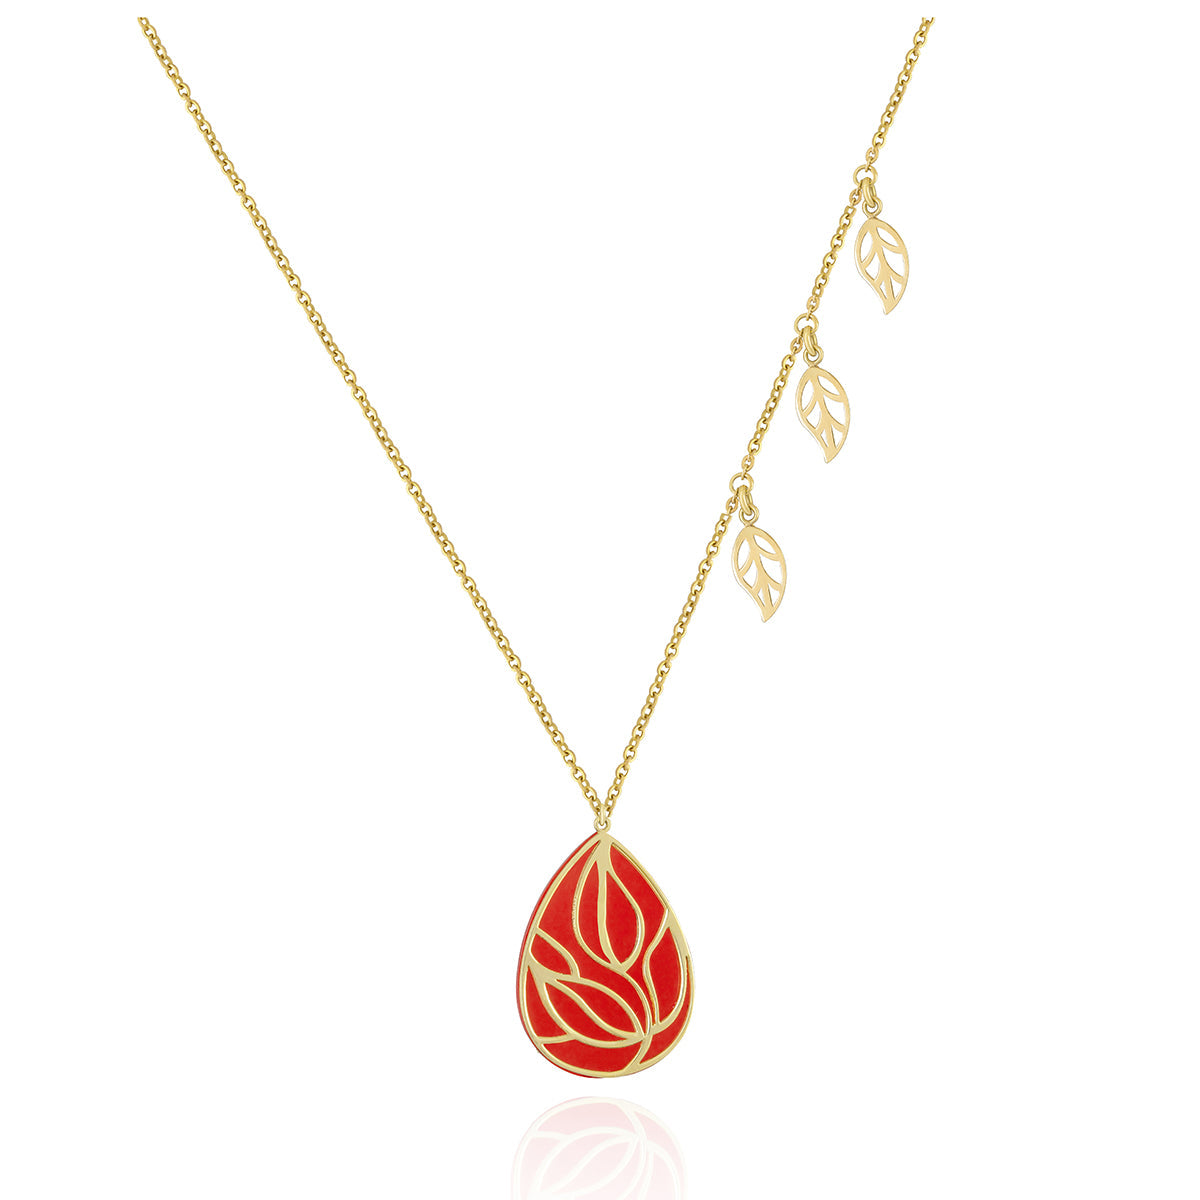 Tear Drop Pendant with leaf charms Necklace in 18k Yellow gold | El Mawardy Jewelry 